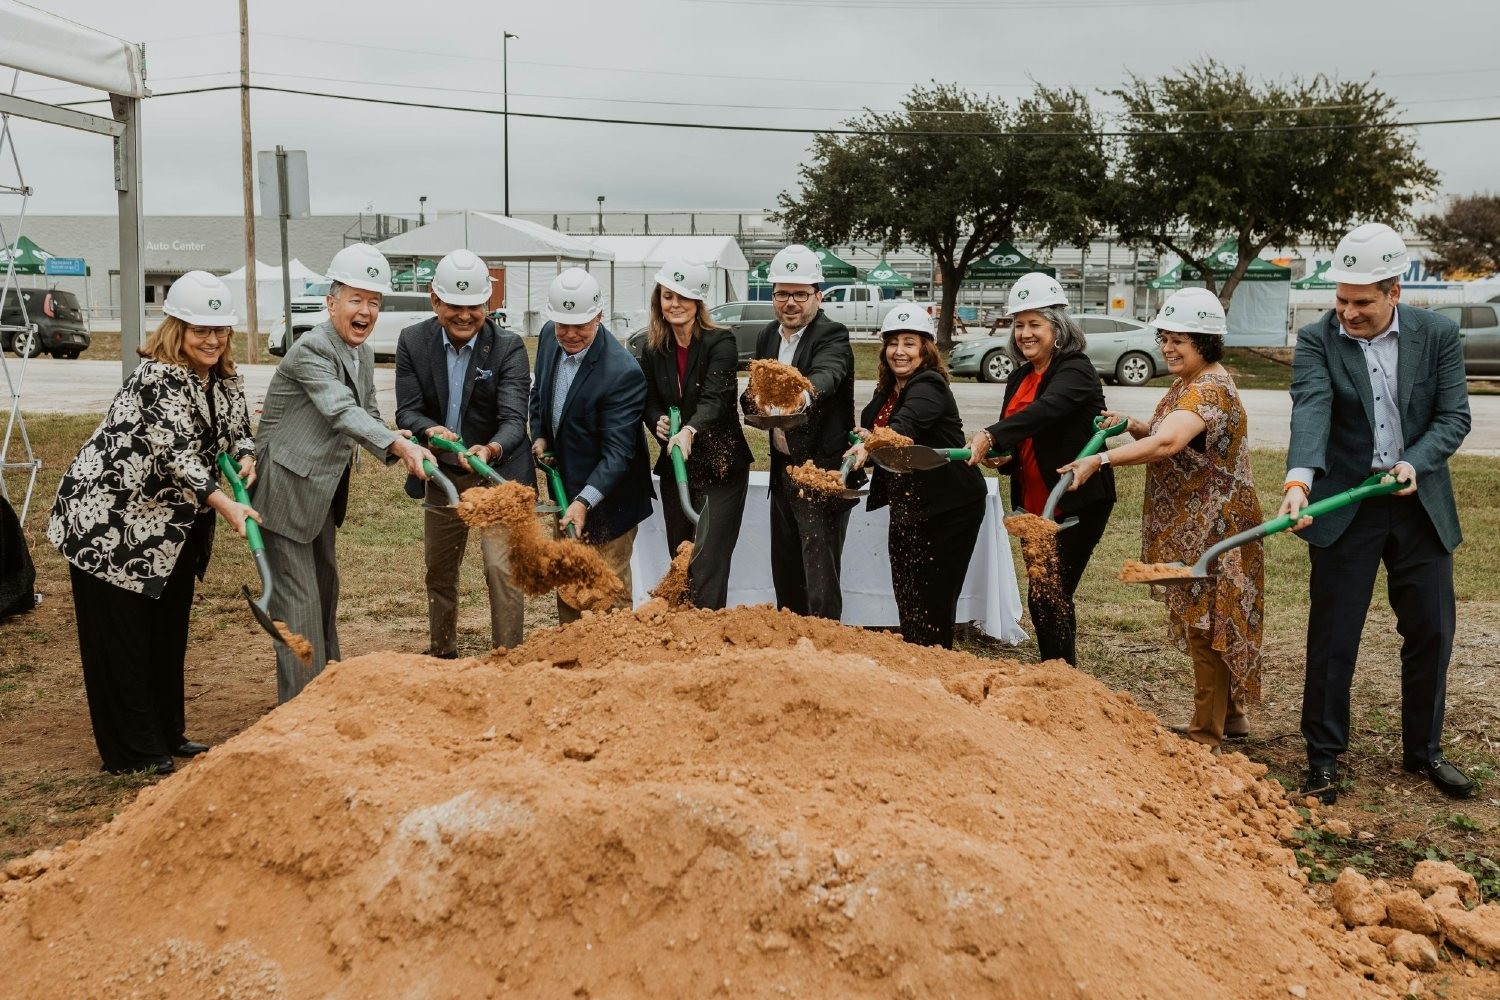 Superior HealthPlan, recently broke ground on a $7.9 million investment that will serve the Uvalde, Texas community.